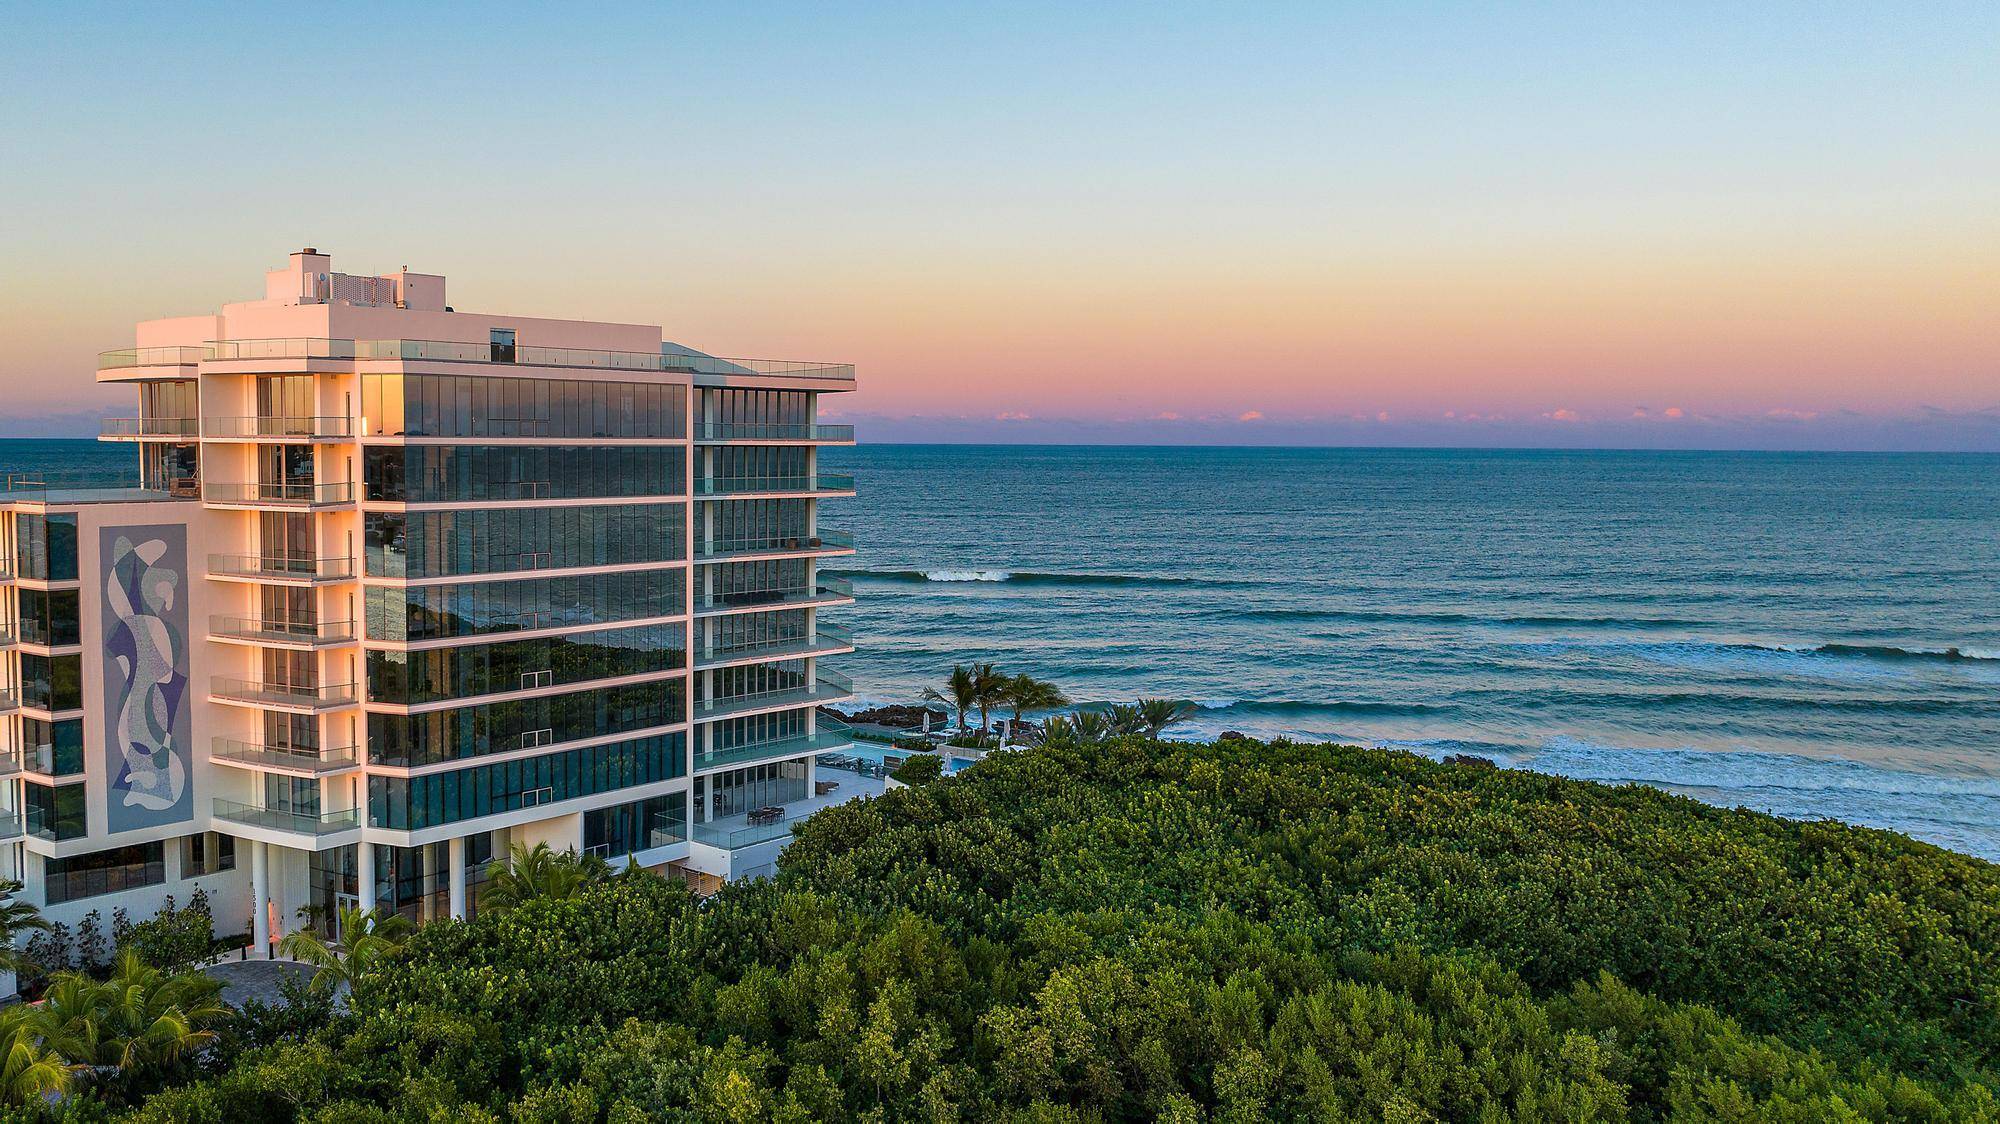 Ocean to Intracoastal. New Construction, ceanfront tower known as SeaGlass Jupiter Island.